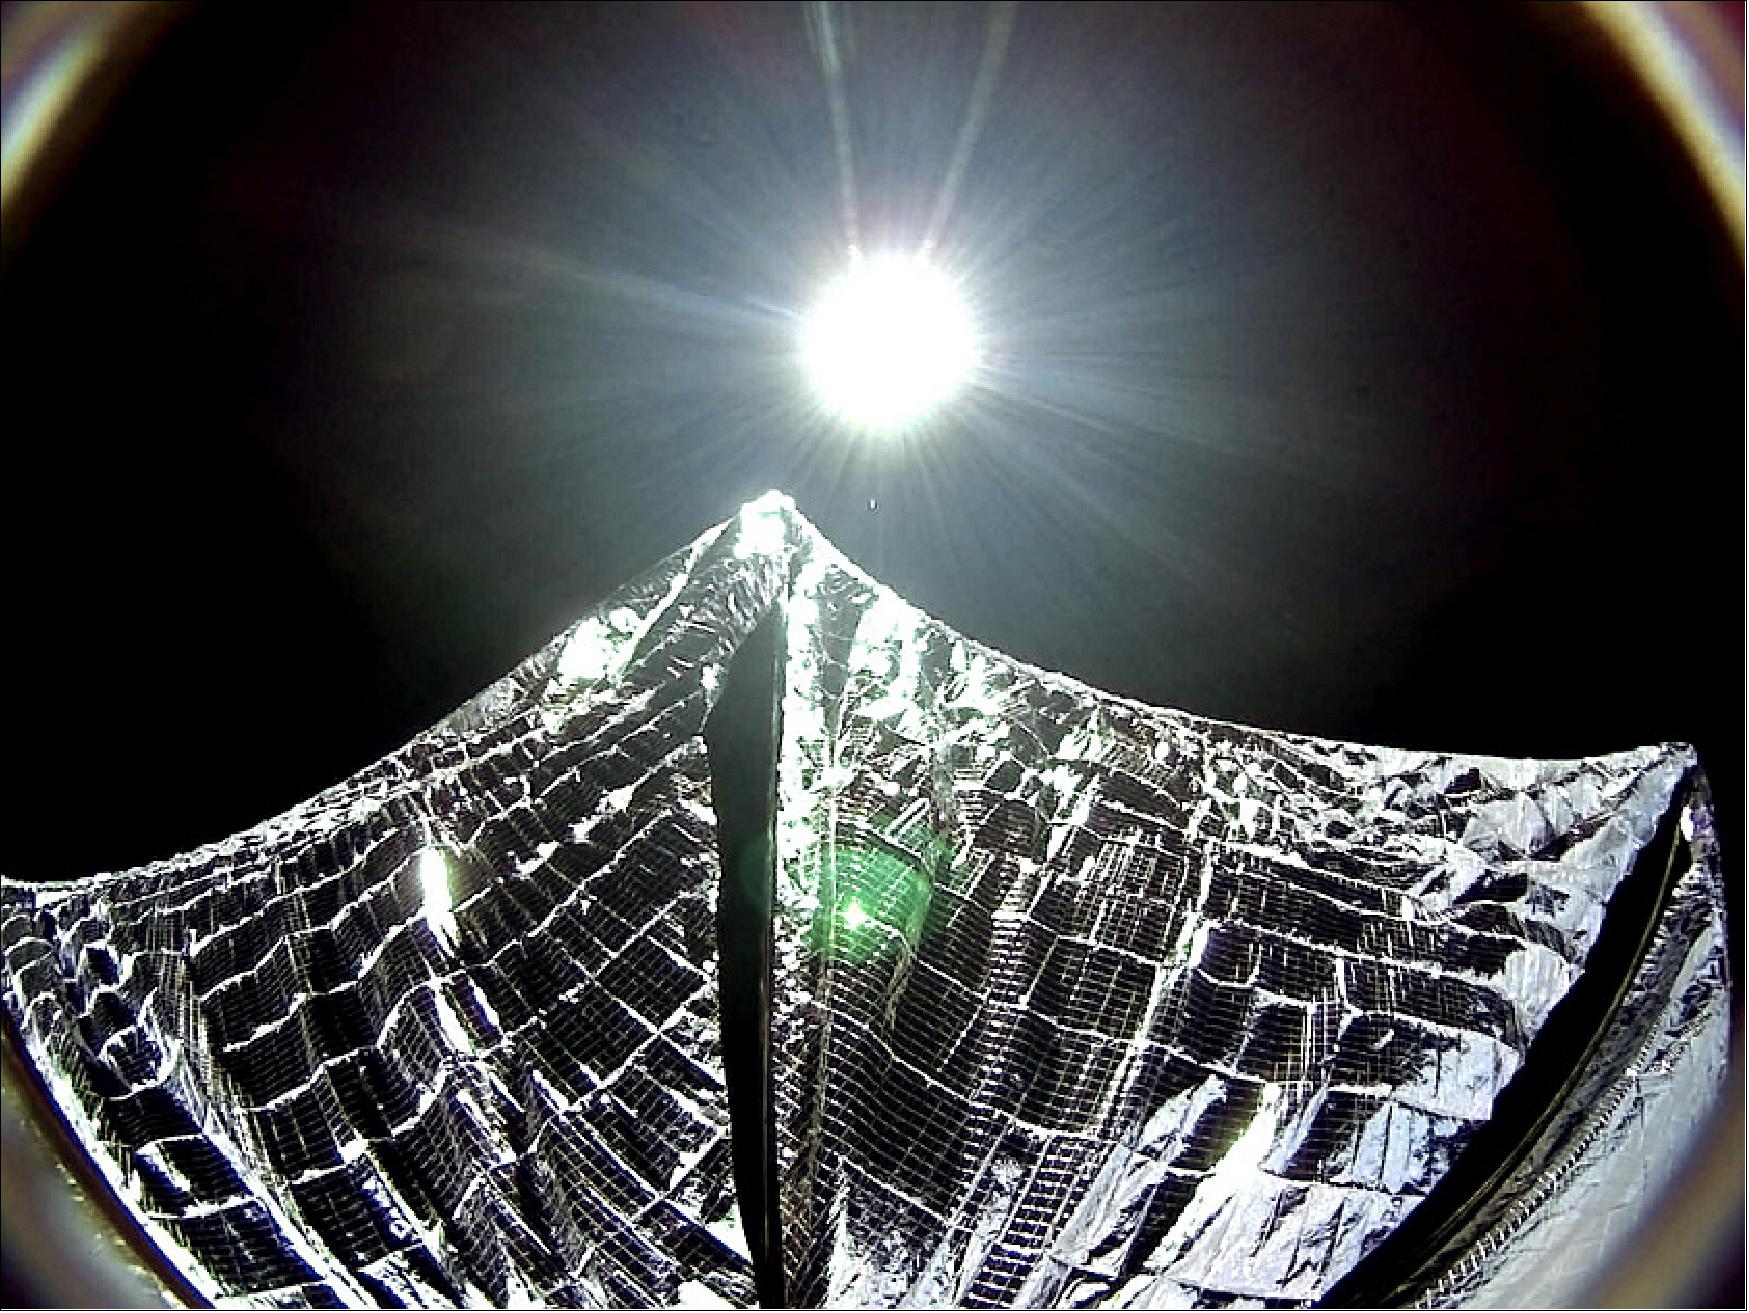 Figure 2: This image was captured by a camera aboard LightSail 1 on June 8, 2015, shortly after solar sail deployment. It was color-corrected by Dan Slater to remove the camera's artificial purplish tint based on ground test images, and is a closer approximation to what the human eye would see (image credit: The Planetary Society)